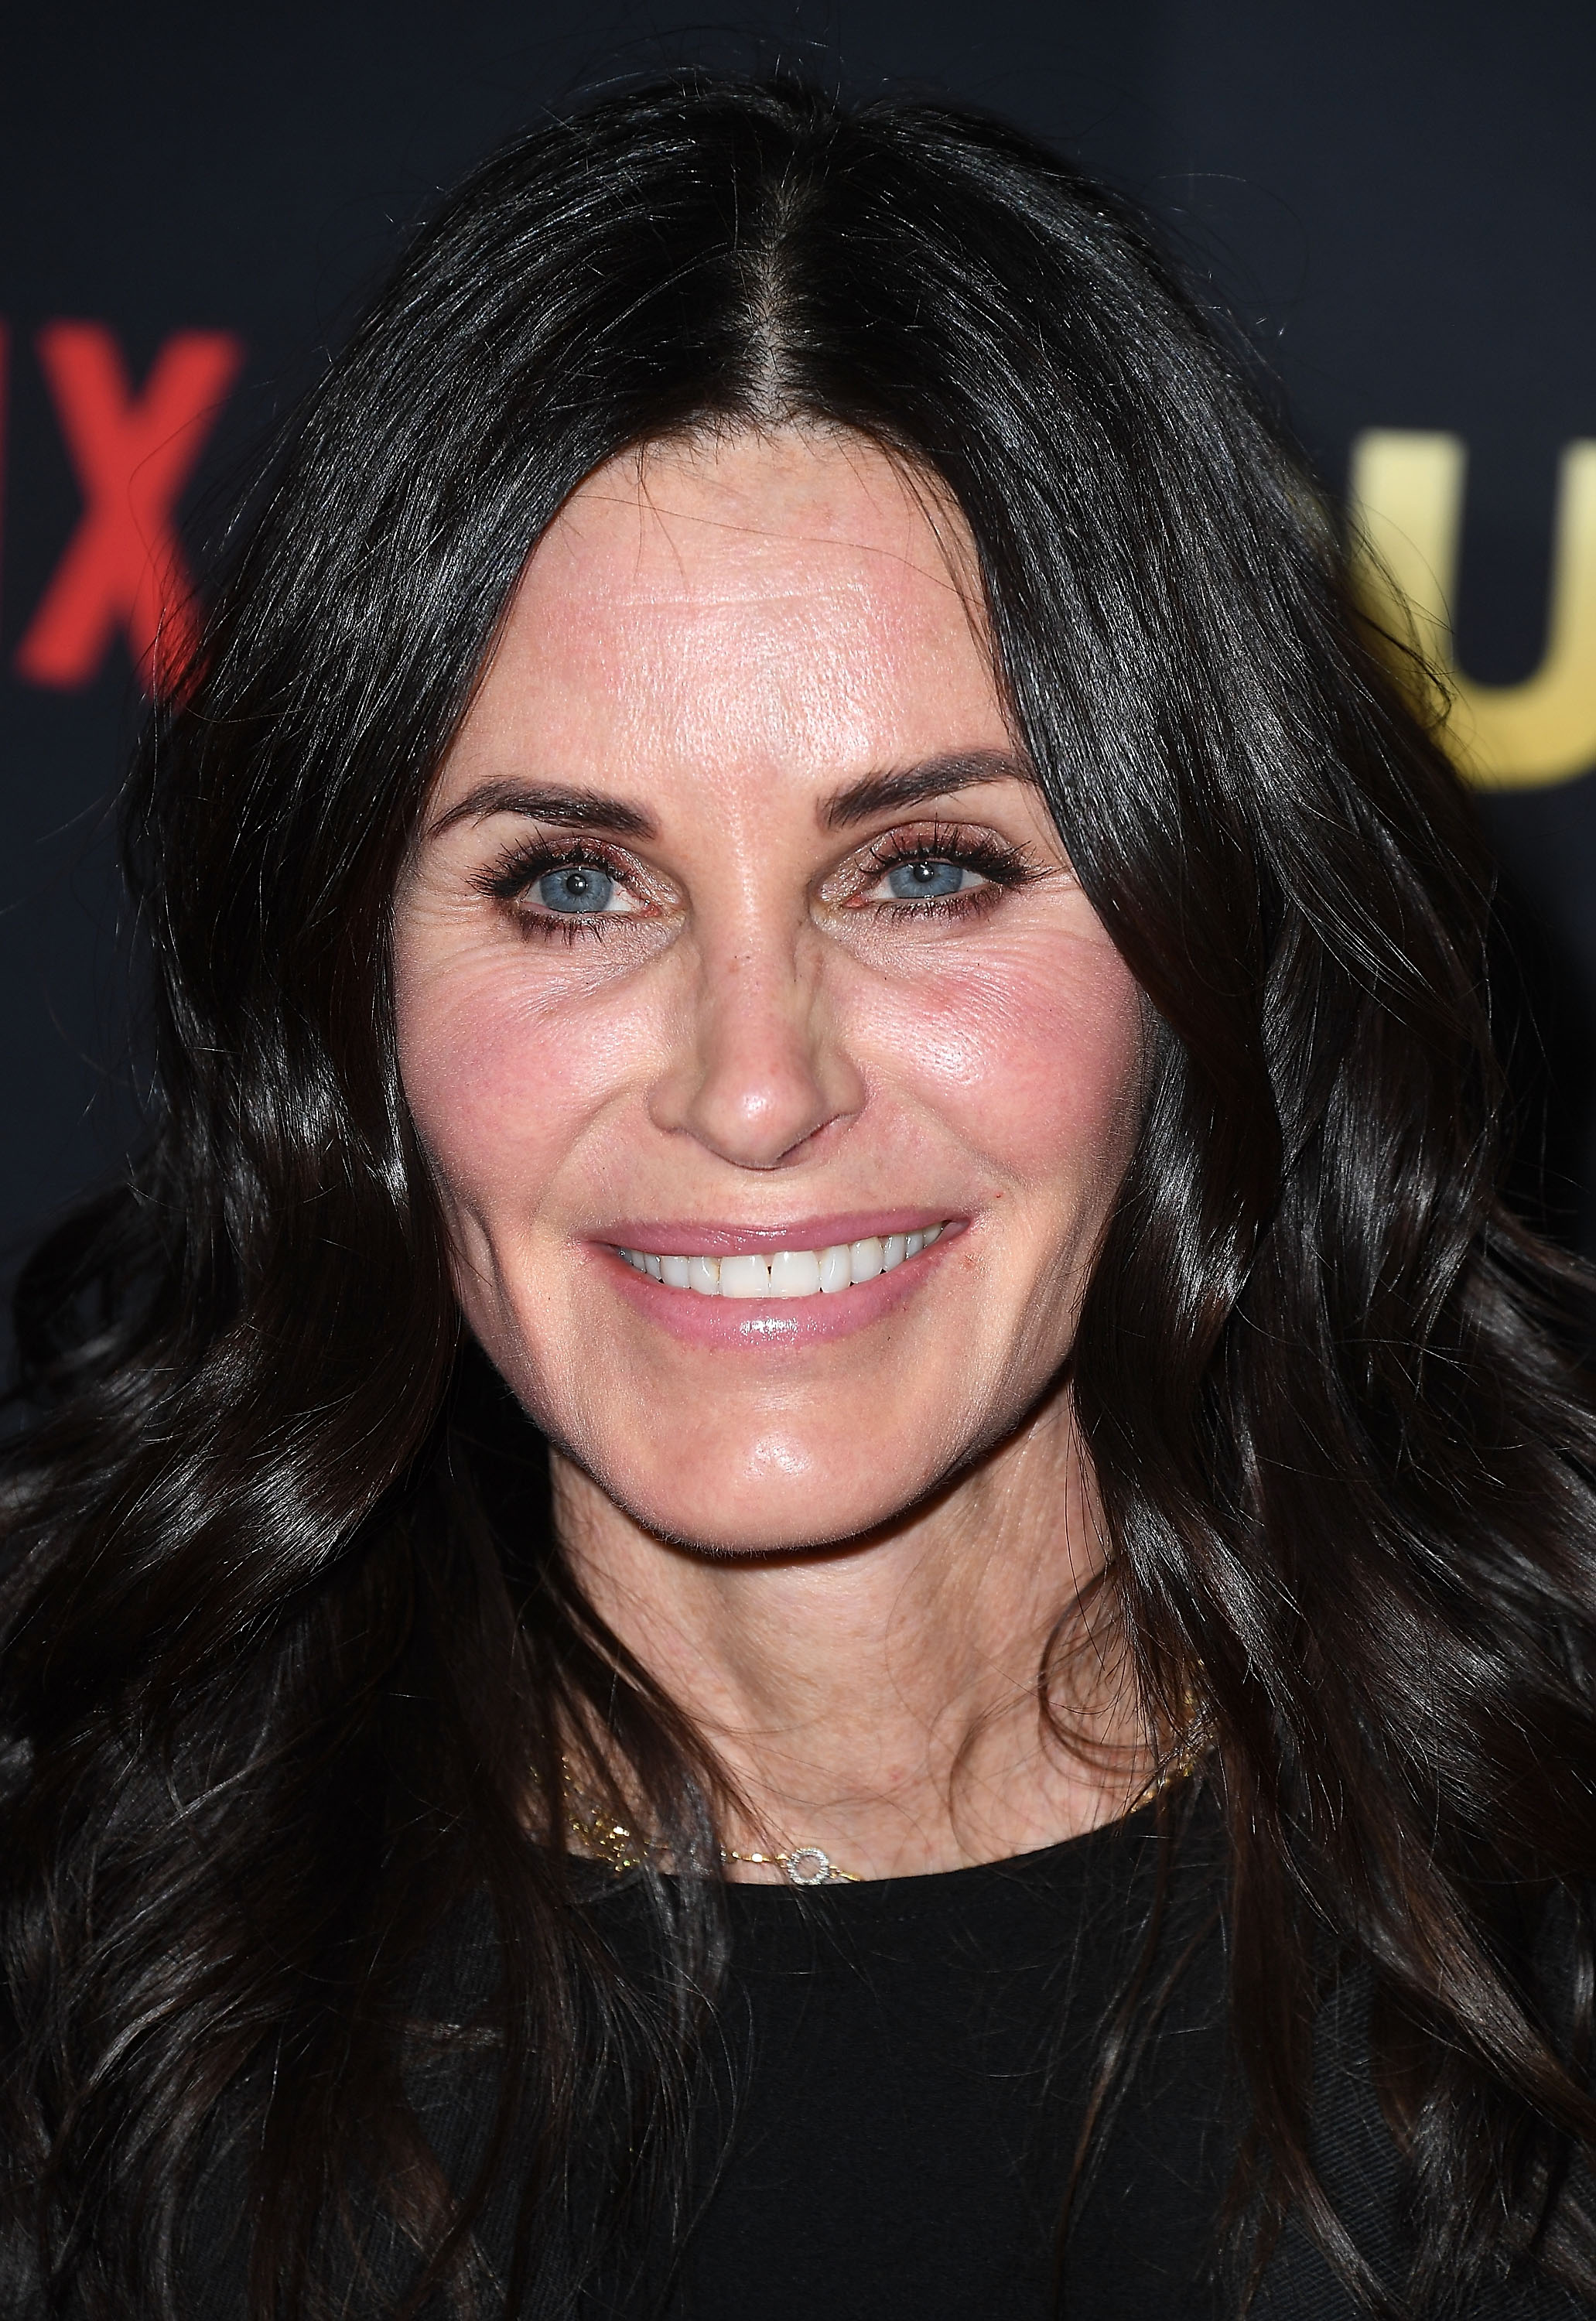 Courtney Cox arrives at the premiere of Netflix's "Dumplin'" at TCL Chinese 6 Theatres in Hollywood, California on December 6, 2018. | Source: Getty Images